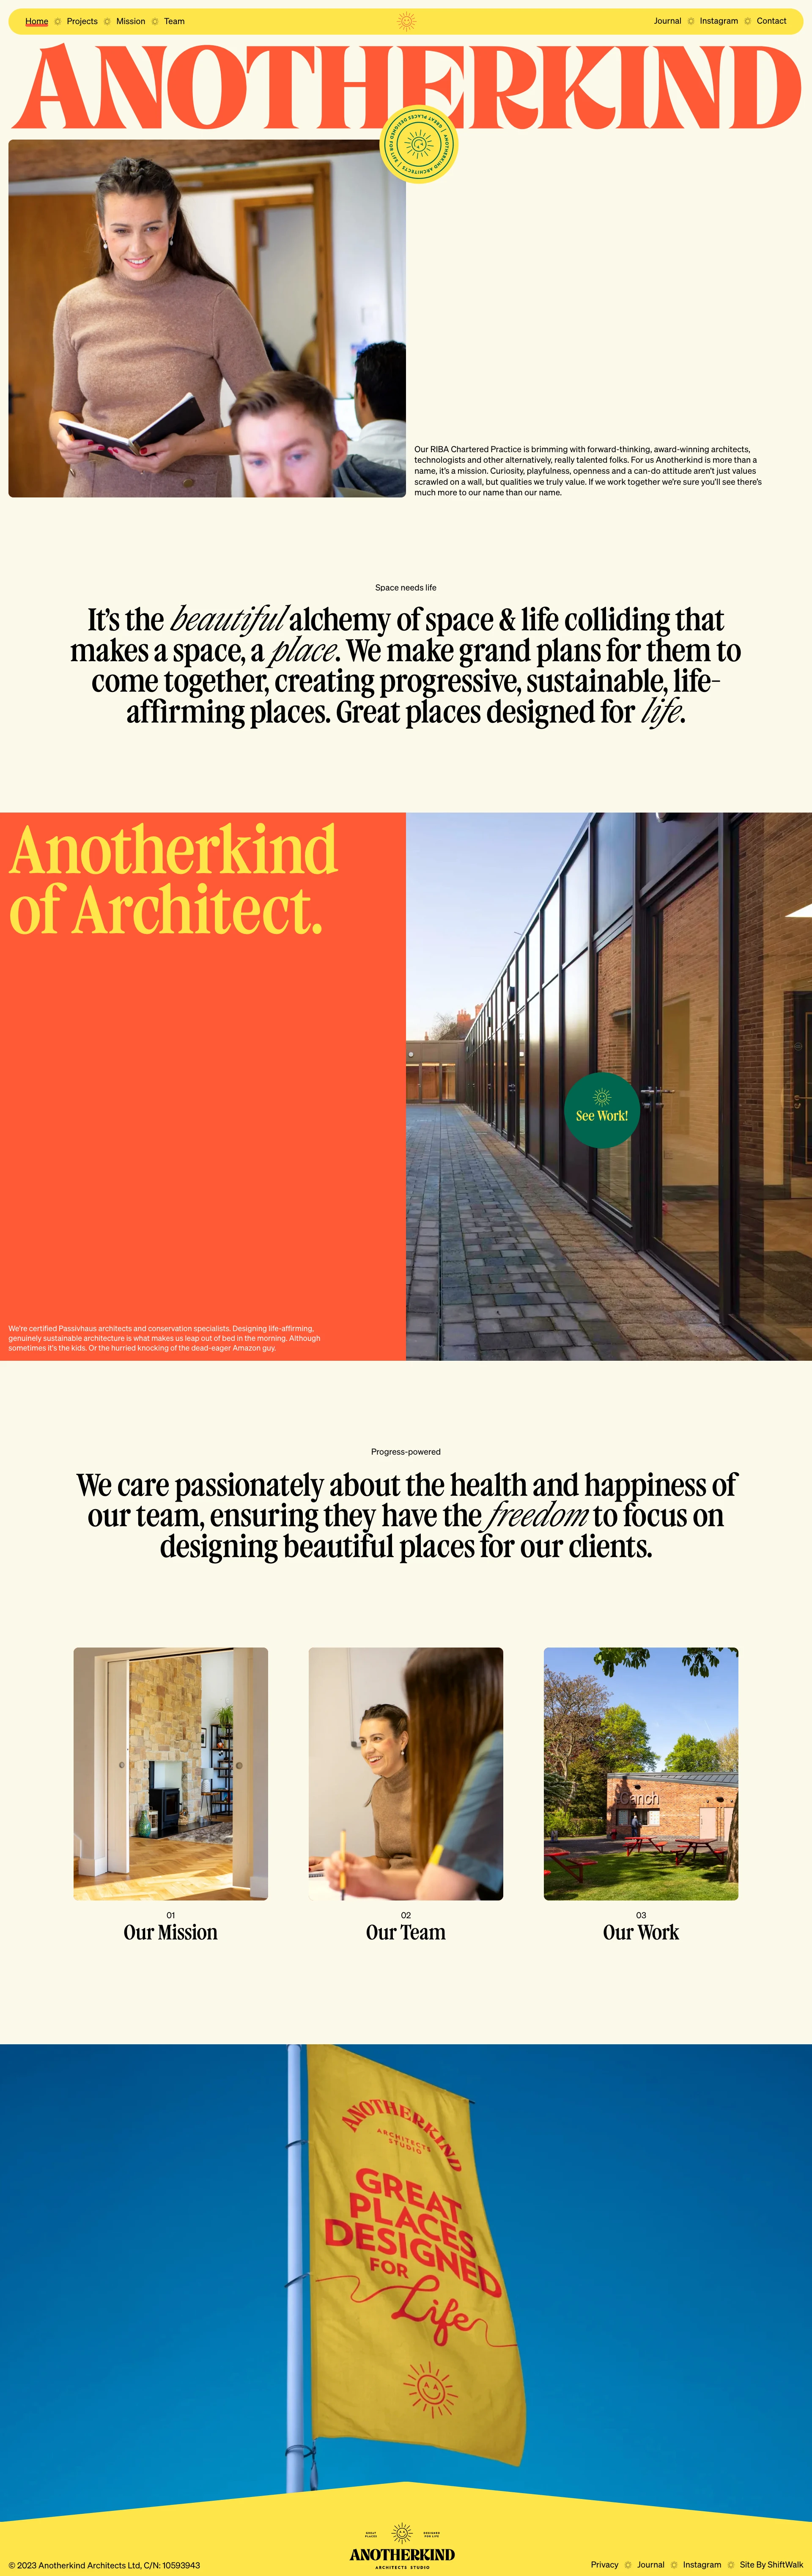 Anotherkind Landing Page Example: Our RIBA Chartered Practice is brimming with forward-thinking, award-winning architects, technologists and other alternatively, really talented folks. For us Anotherkind is more than a name, it’s a mission. Curiosity, playfulness, openness and a can-do attitude aren’t just values scrawled on a wall, but qualities we truly value. If we work together we’re sure you’ll see there’s much more to our name than our name.